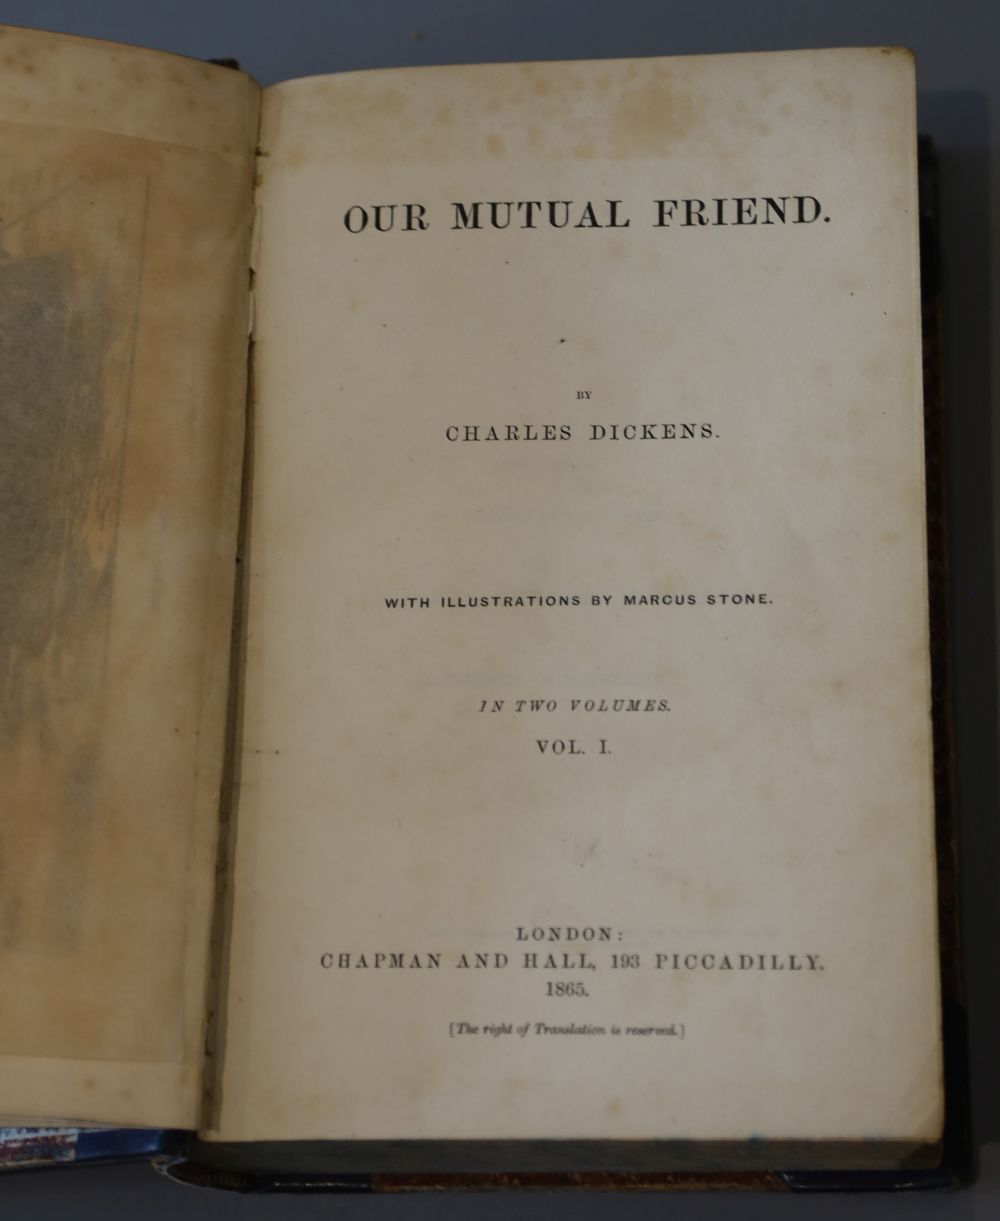 Dickens, Charles - Our Mutual Friend, 1st edition, 2 vols (in 1), frontis pieces and 40 engraved plates (by Marcus Stone), contemporary